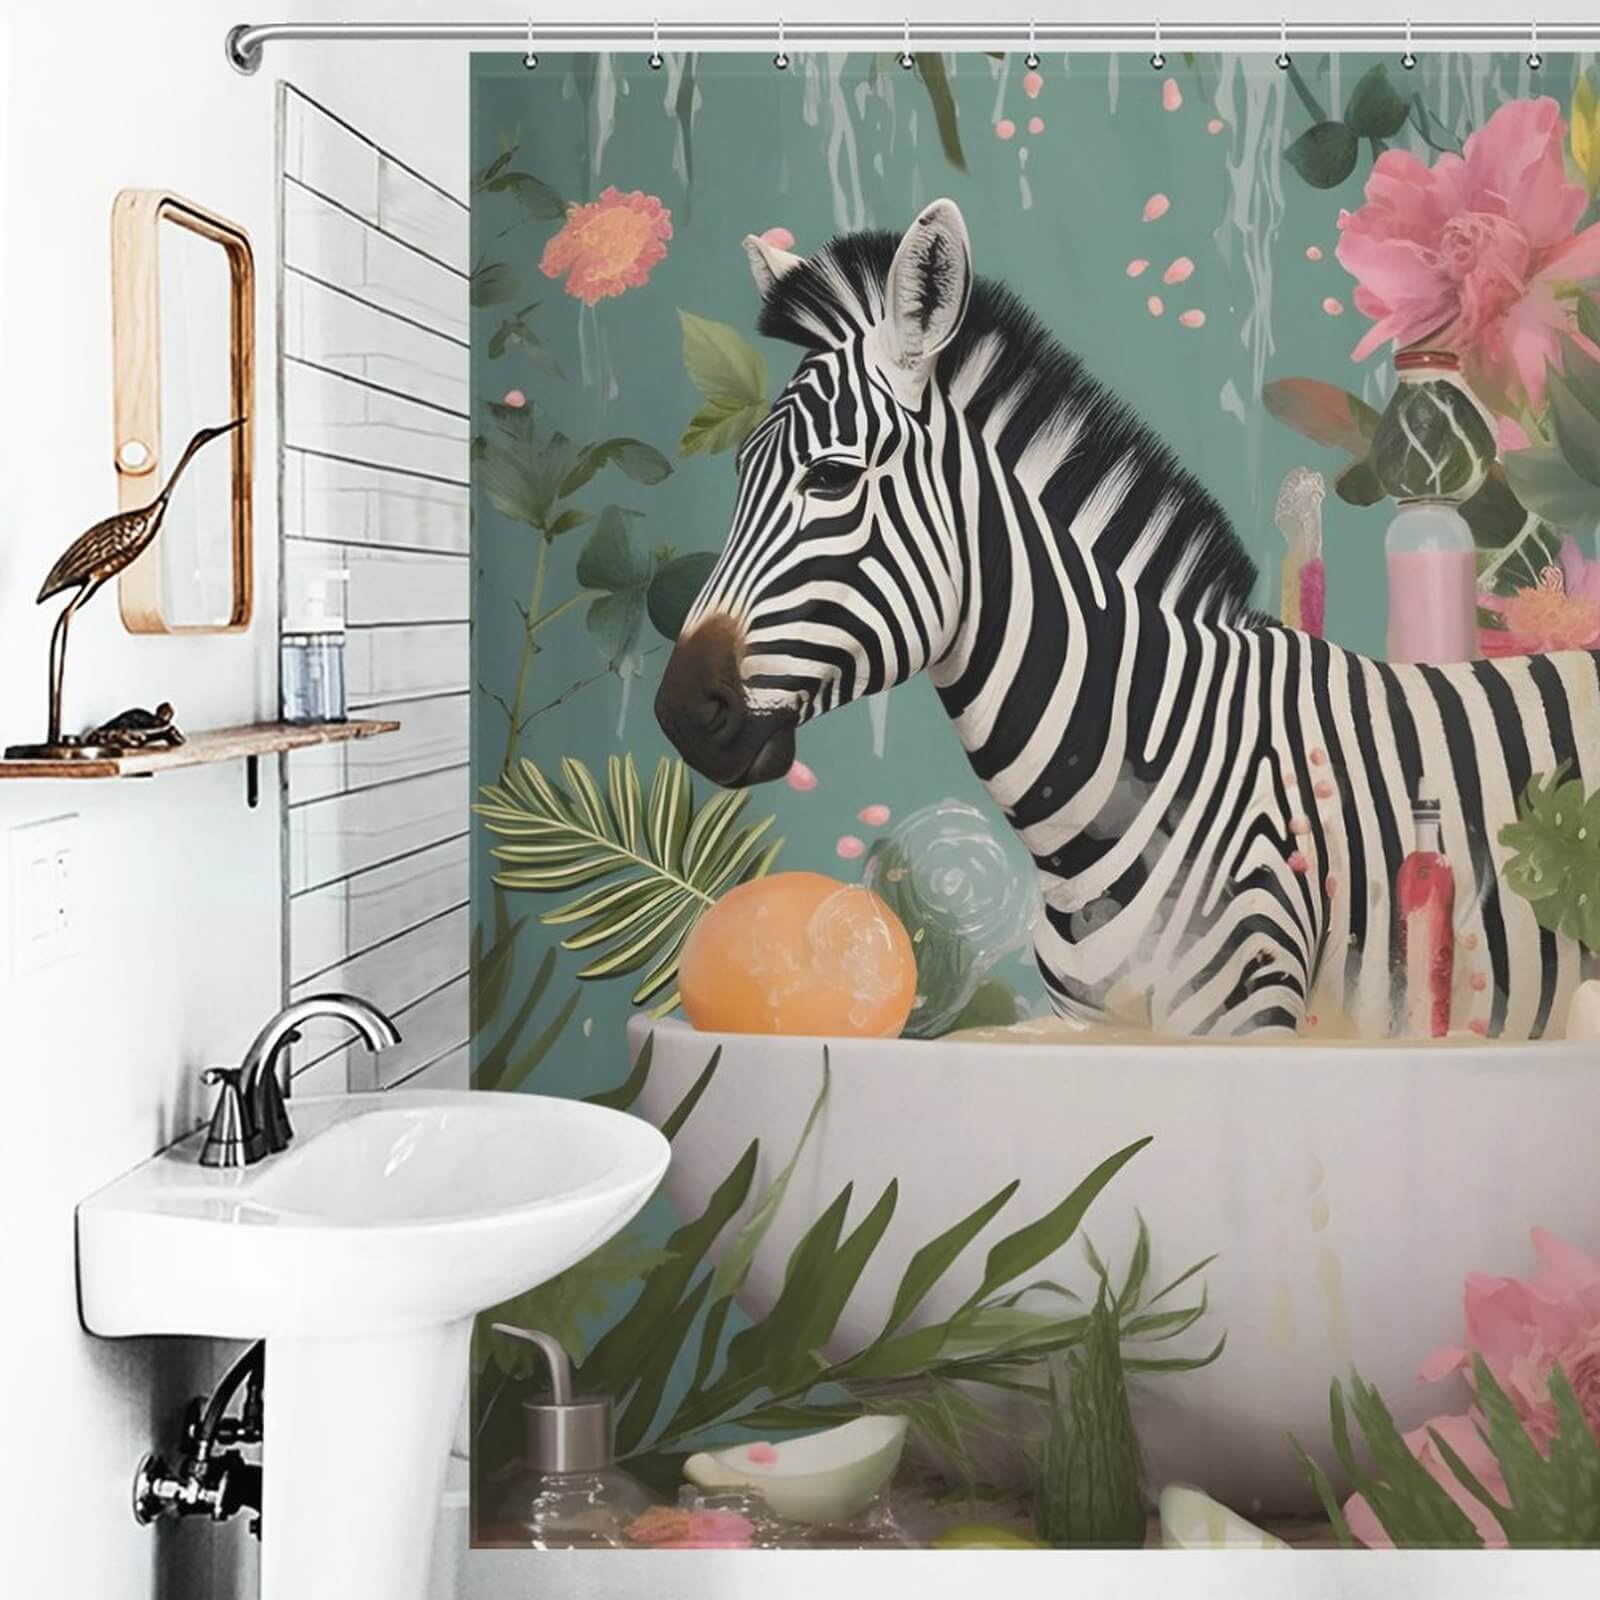 A Cotton Cat Zebra In Bathtub Shower Curtain adds a touch of safari-inspired charm to your bathroom, featuring bold black and white zebra stripes contrasted with vibrant flowers.